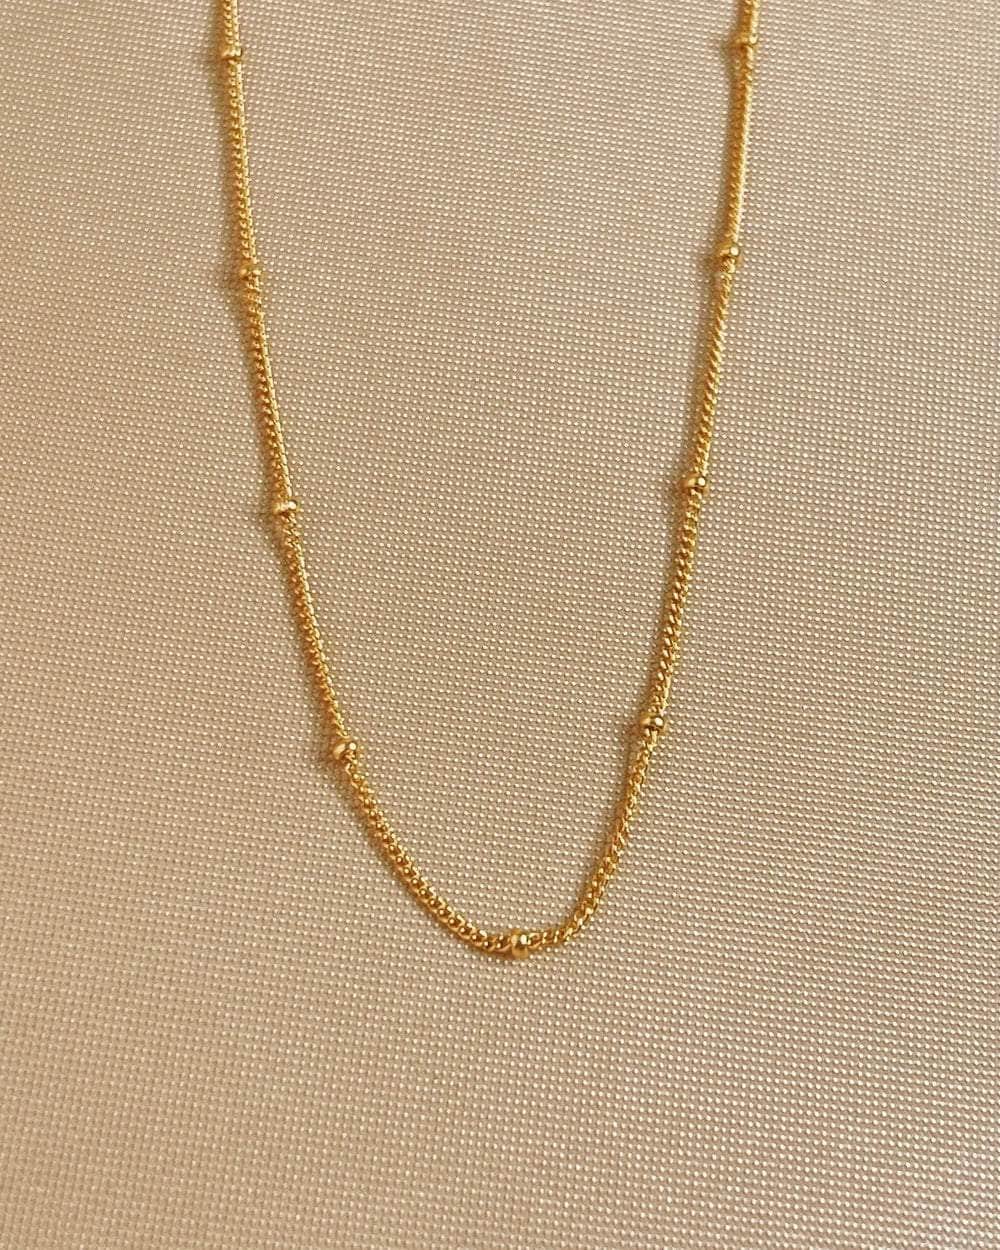 So Dainty Co. Necklaces Alexa Gold Choker Necklace Gold Plated 925 Sterling Silver Jewelry